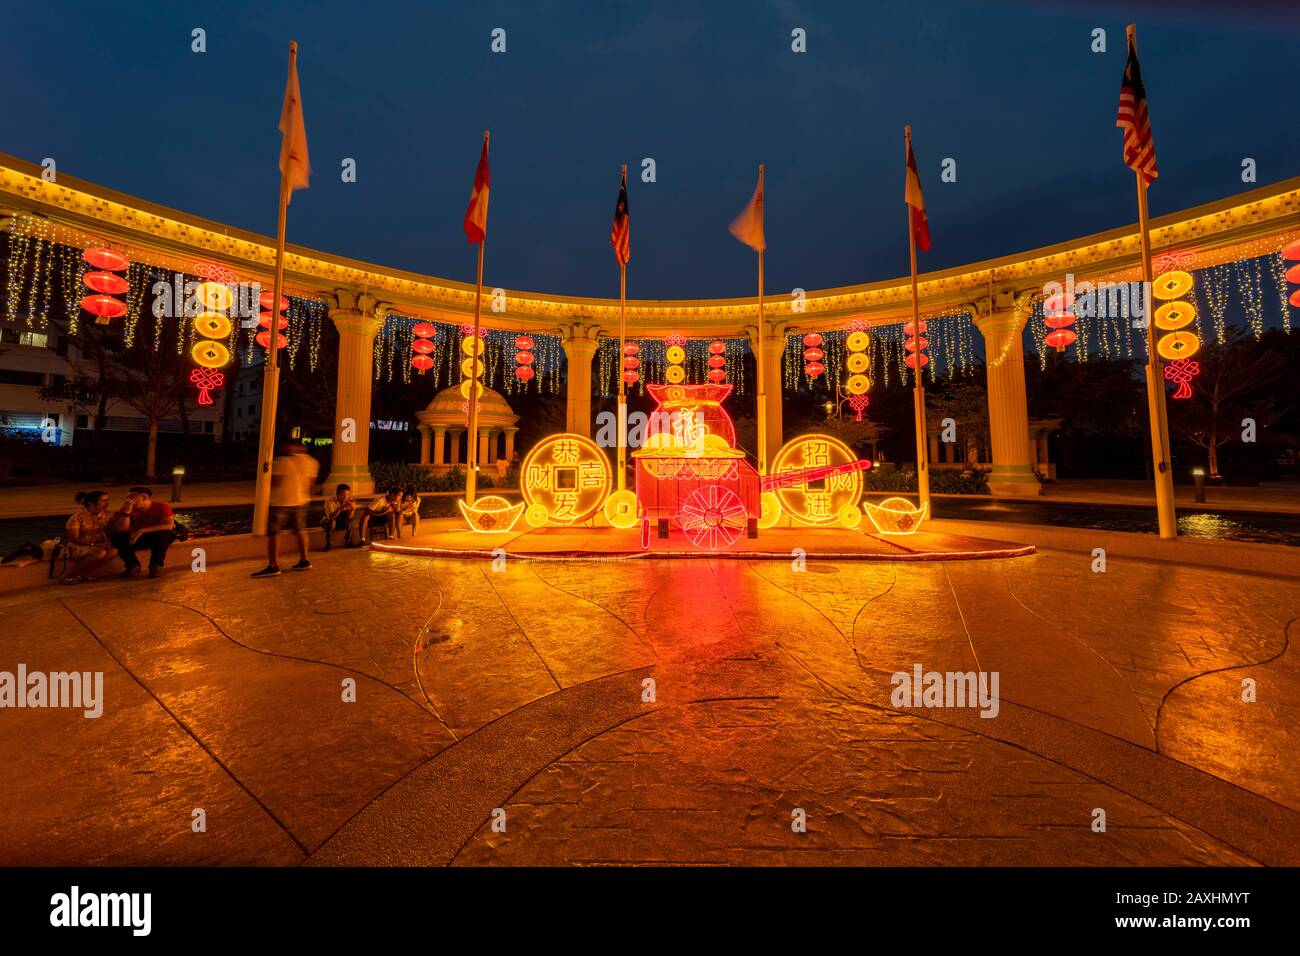 Chinese New Year display at square in front of Sunway Resort and Hotel Sunway , Selangor, Malaysia at night. Stock Photo